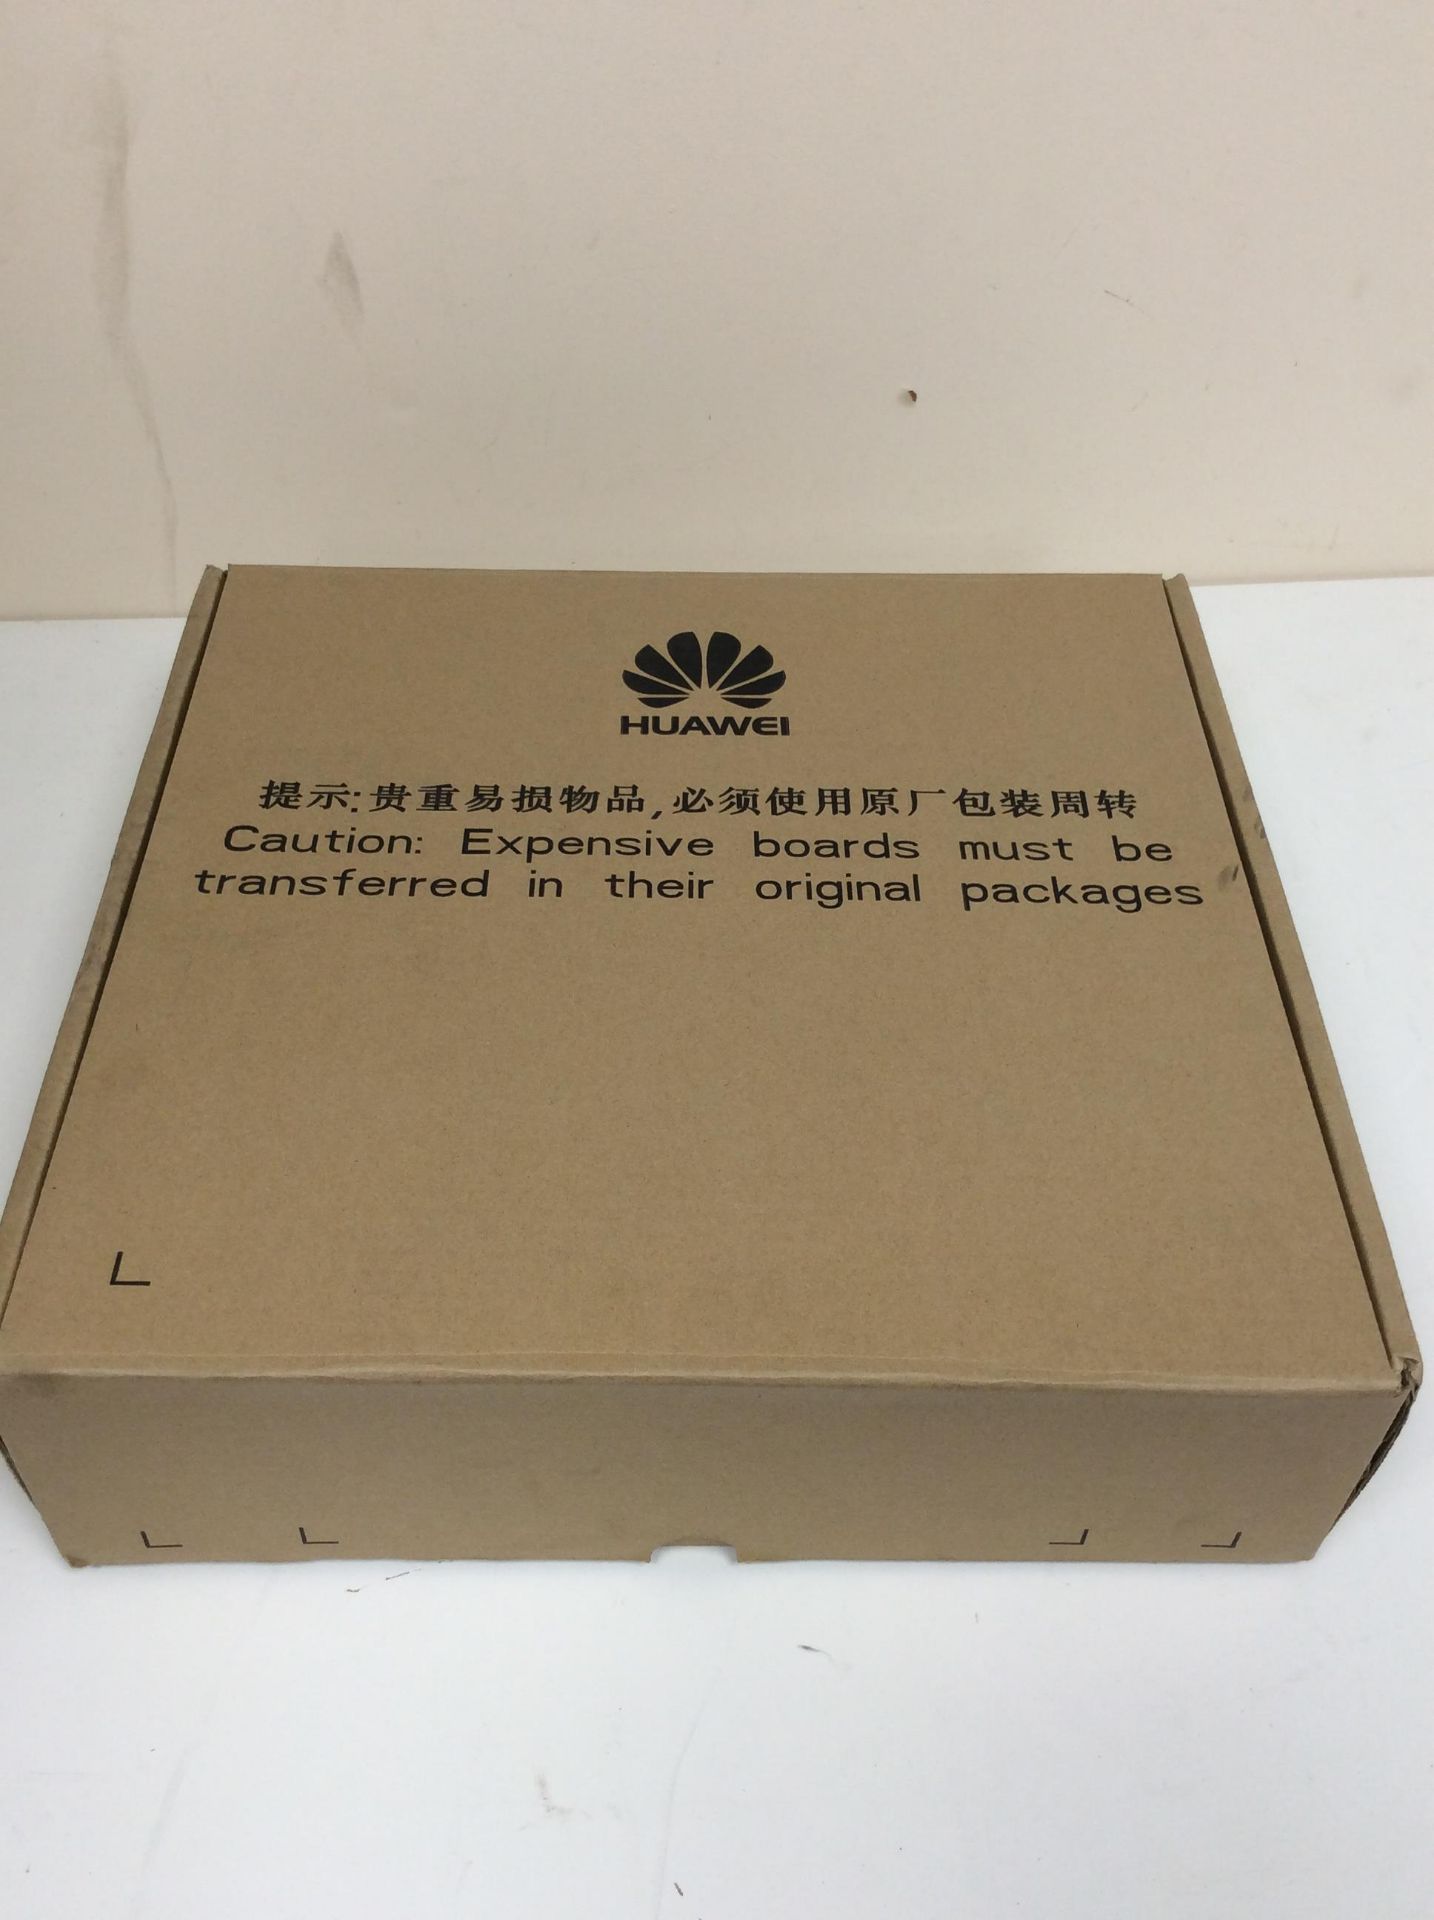 Huawei tn12obu205 c-band optical booster unit max 0dbm in and 23dbm out gain 23db - Image 2 of 3